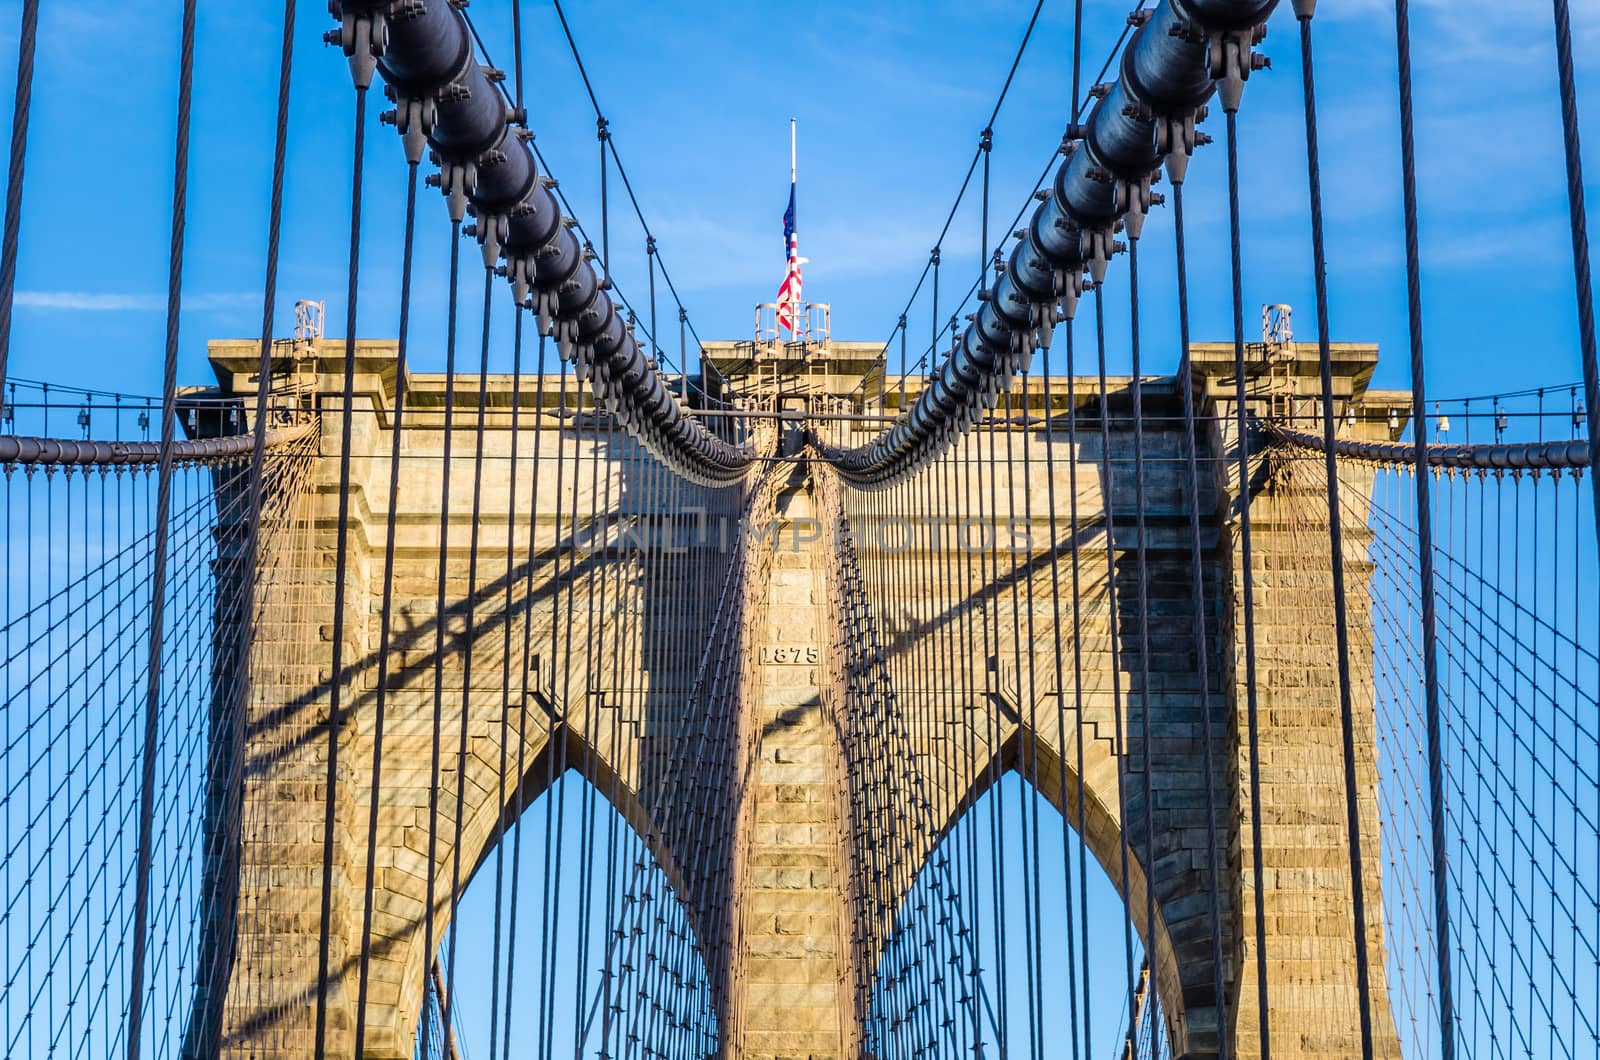 The web of cables of Brooklyn bridge, New York, USA by mauricallari